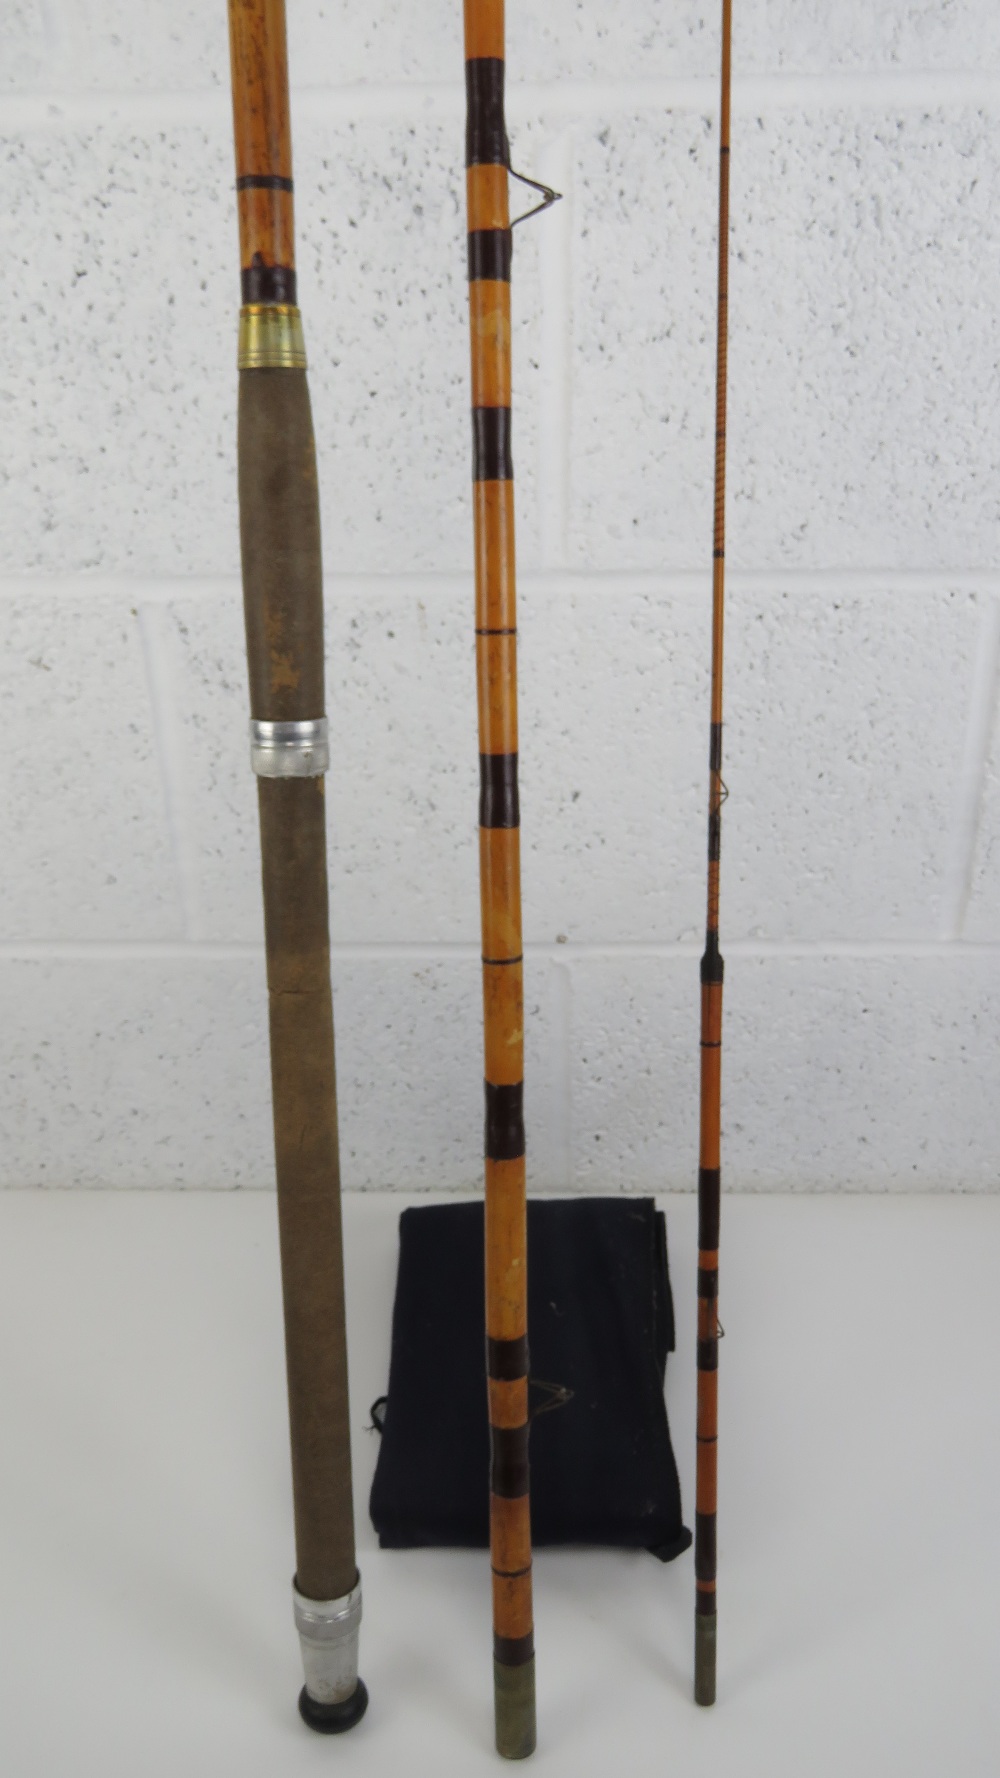 A vintage split can three sectional float rod for course fishing, 355cm in length, with cloth bag. - Image 2 of 2